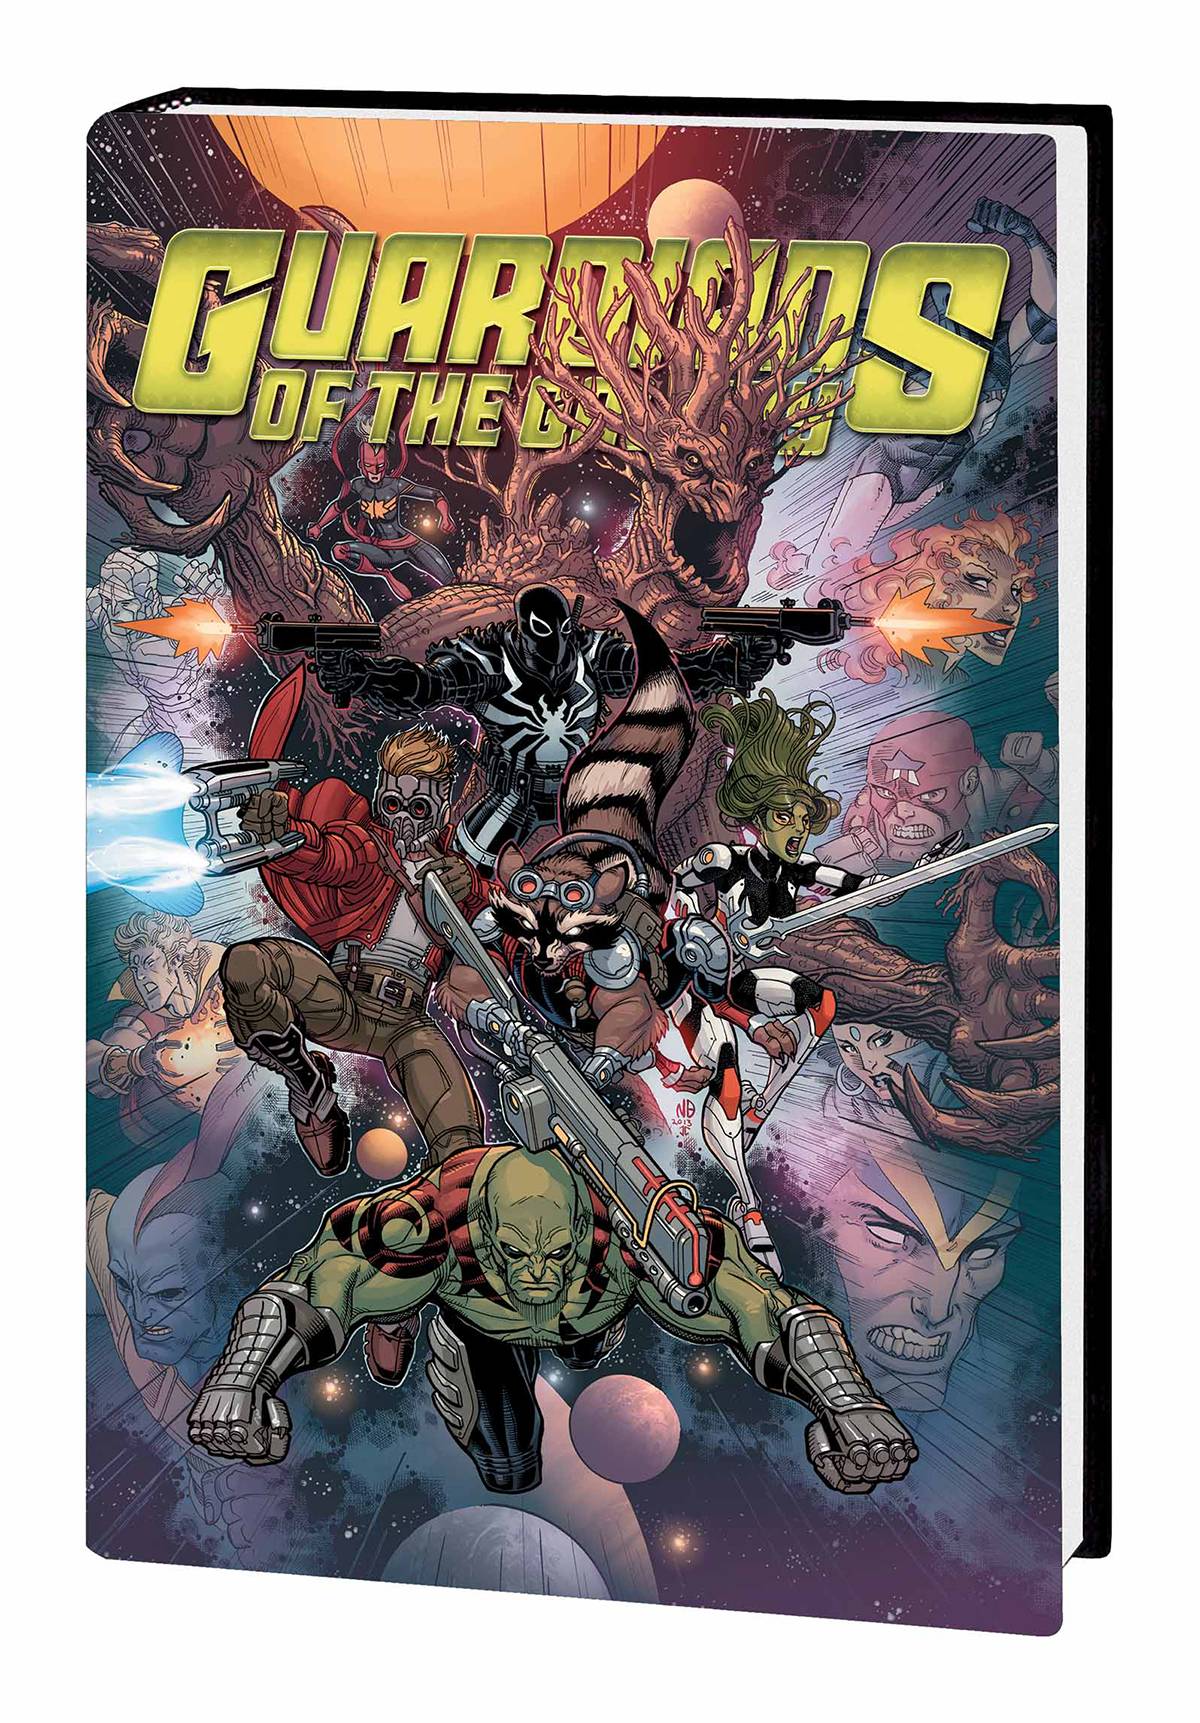 Guardians Galaxy Hardcover Volume 3 Guardians Disassembled